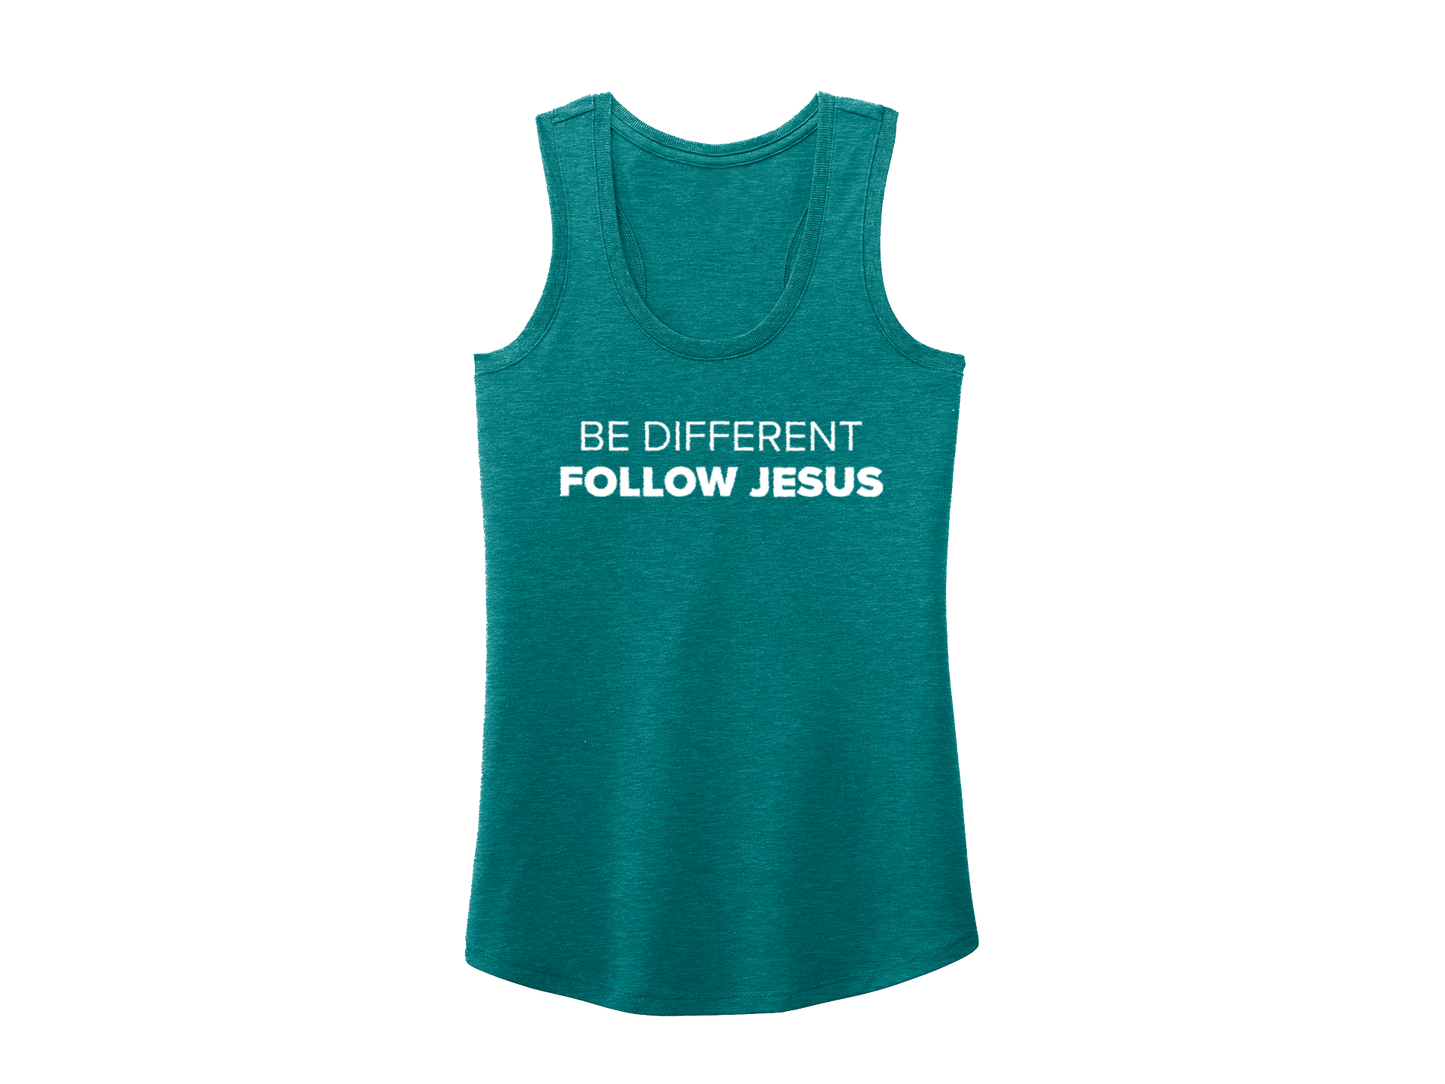 BE DIFFERENT FOLLOW JESUS TANK GREEN - CHRISTIAN CLOTHING